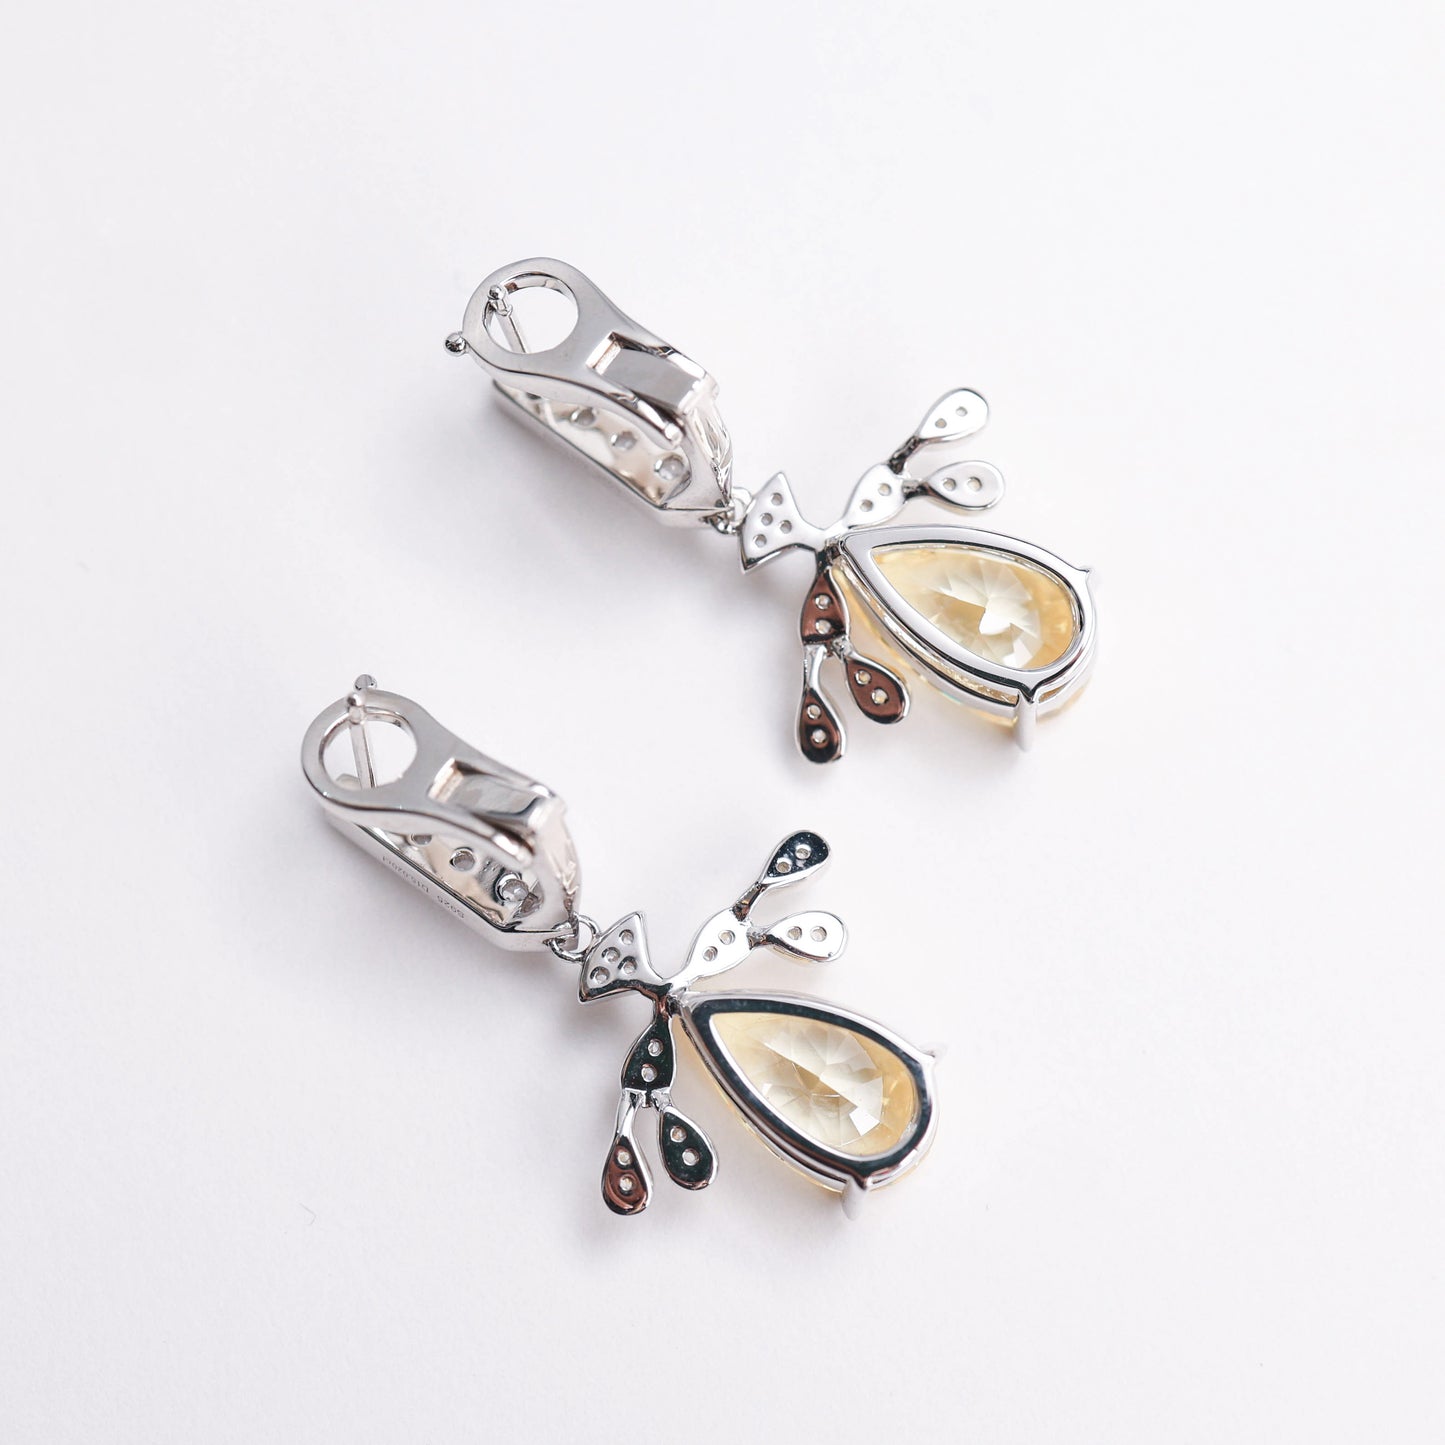 Micro-setting Yellow diamond color Lab created stones Angel's Wings earrings. sterling silver.